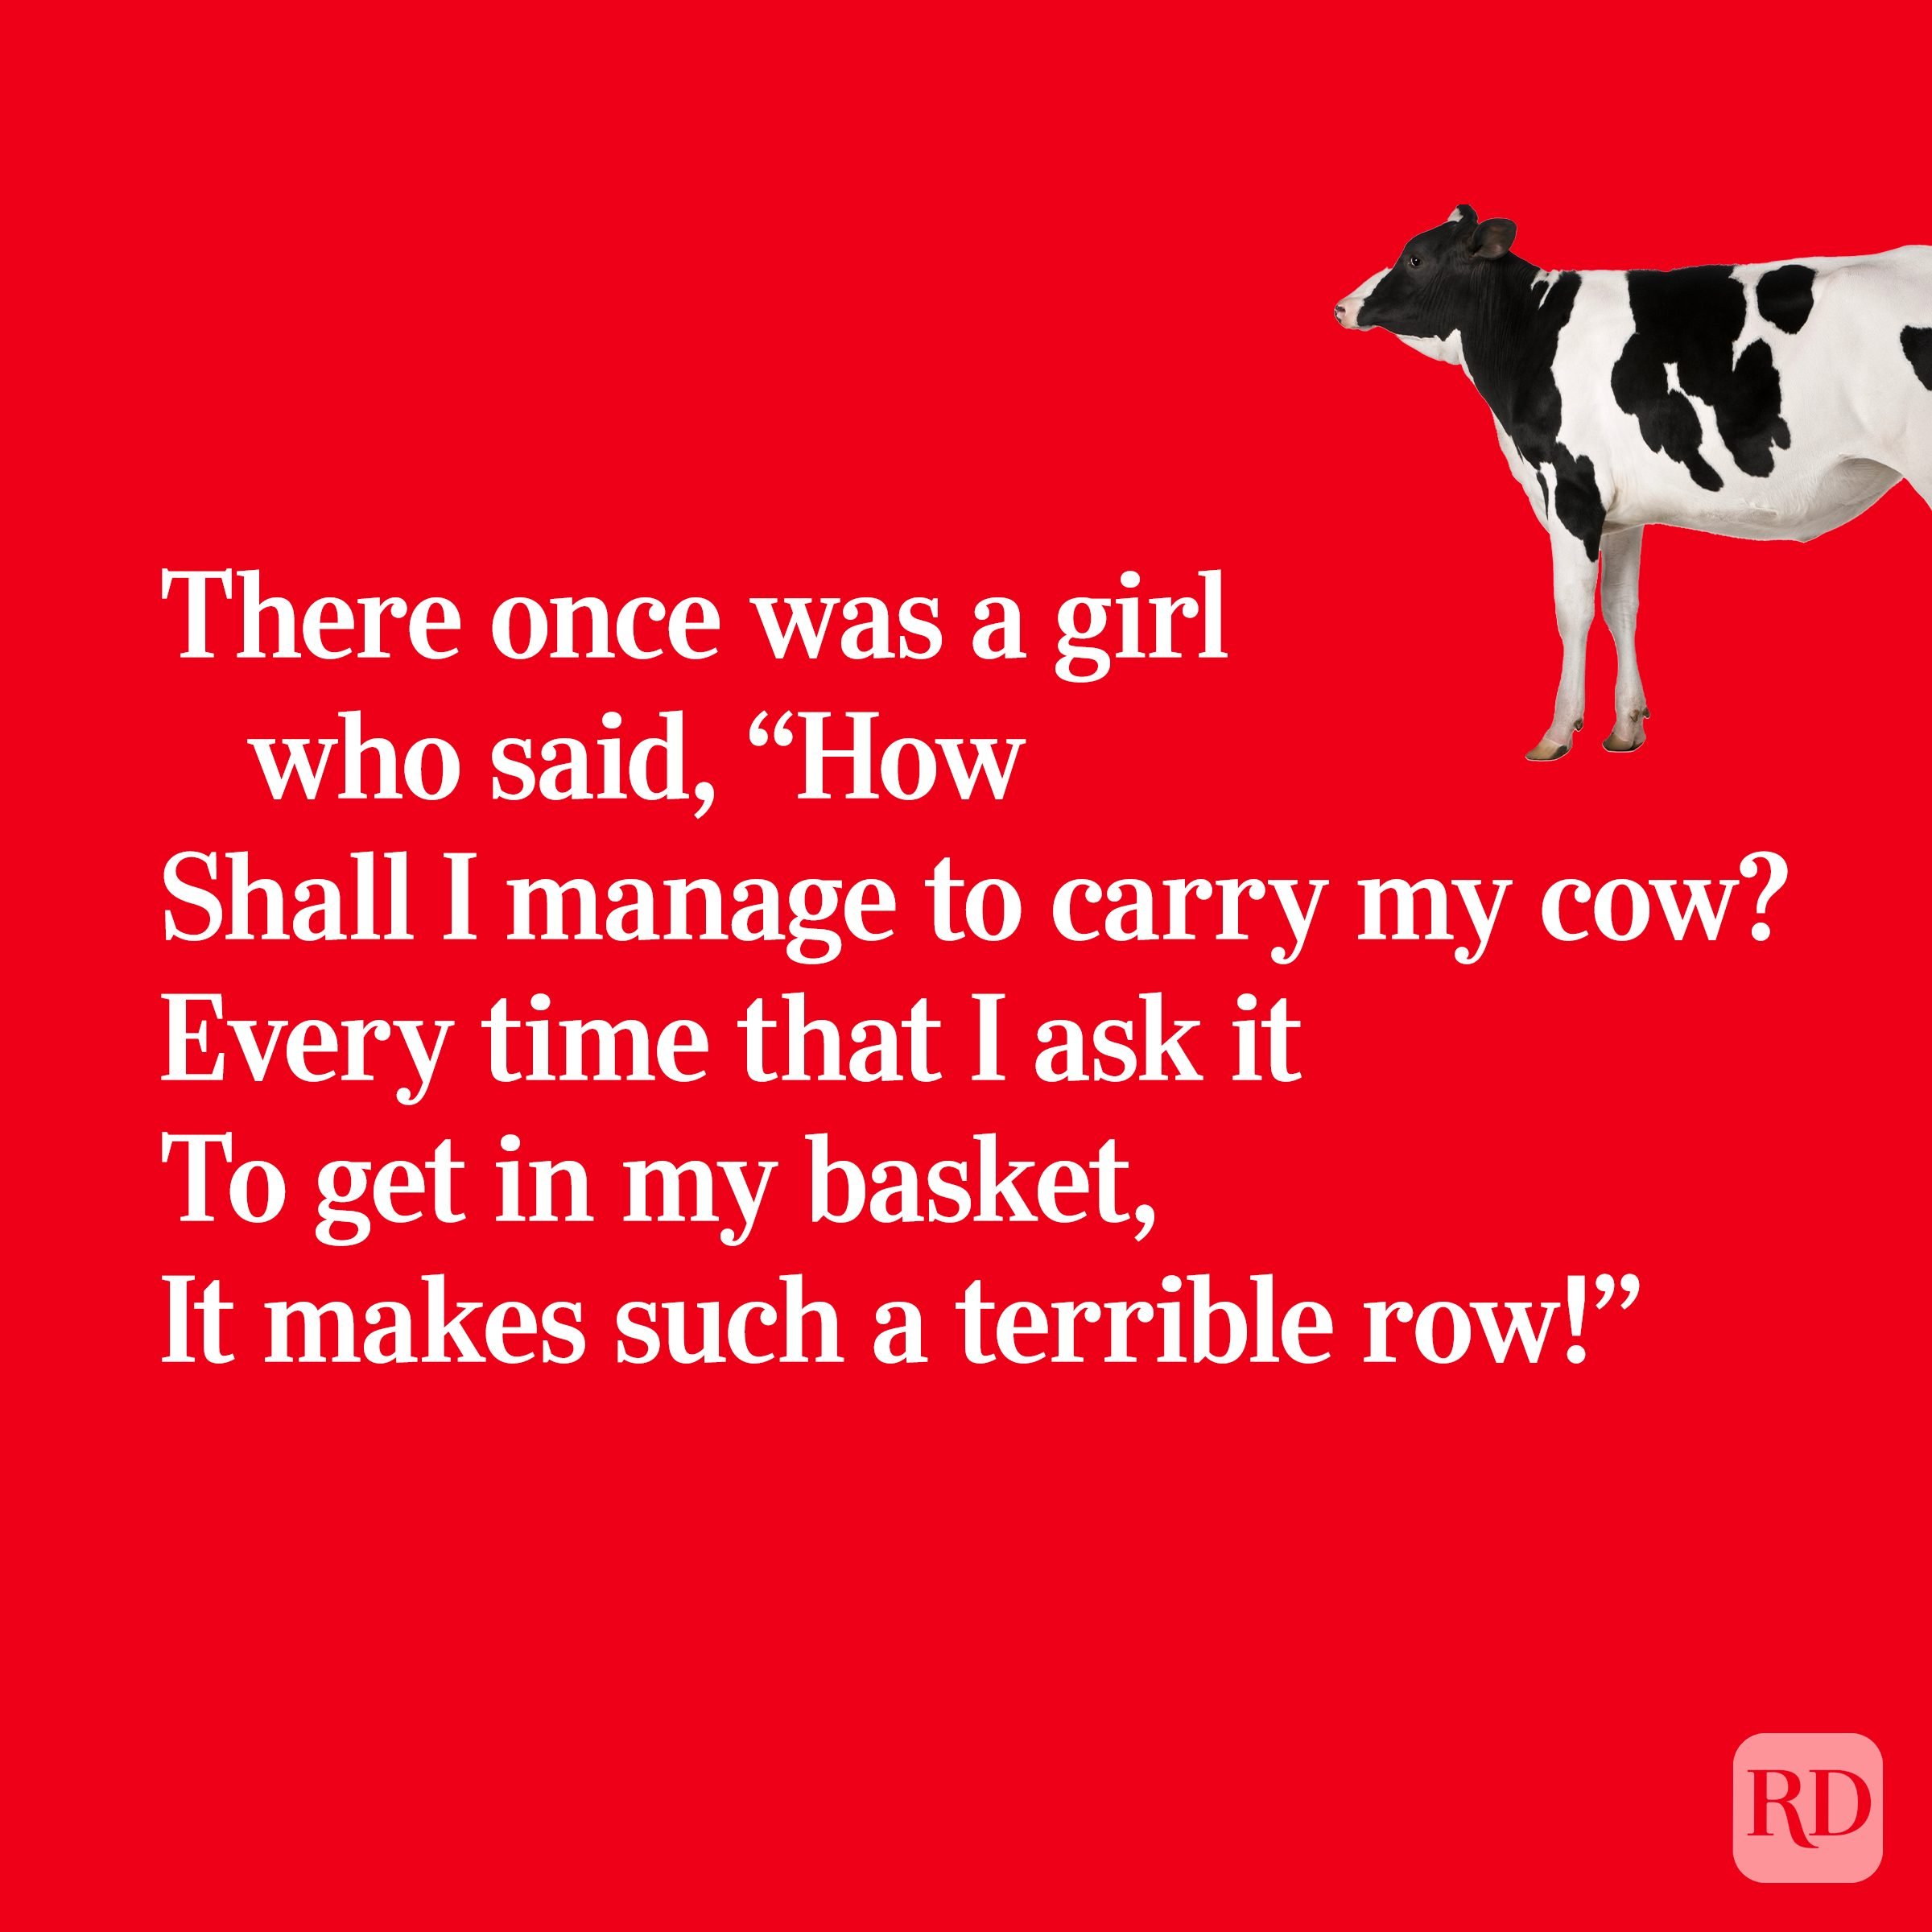 20 Limericks for Kids That Even Adults Will Find Funny